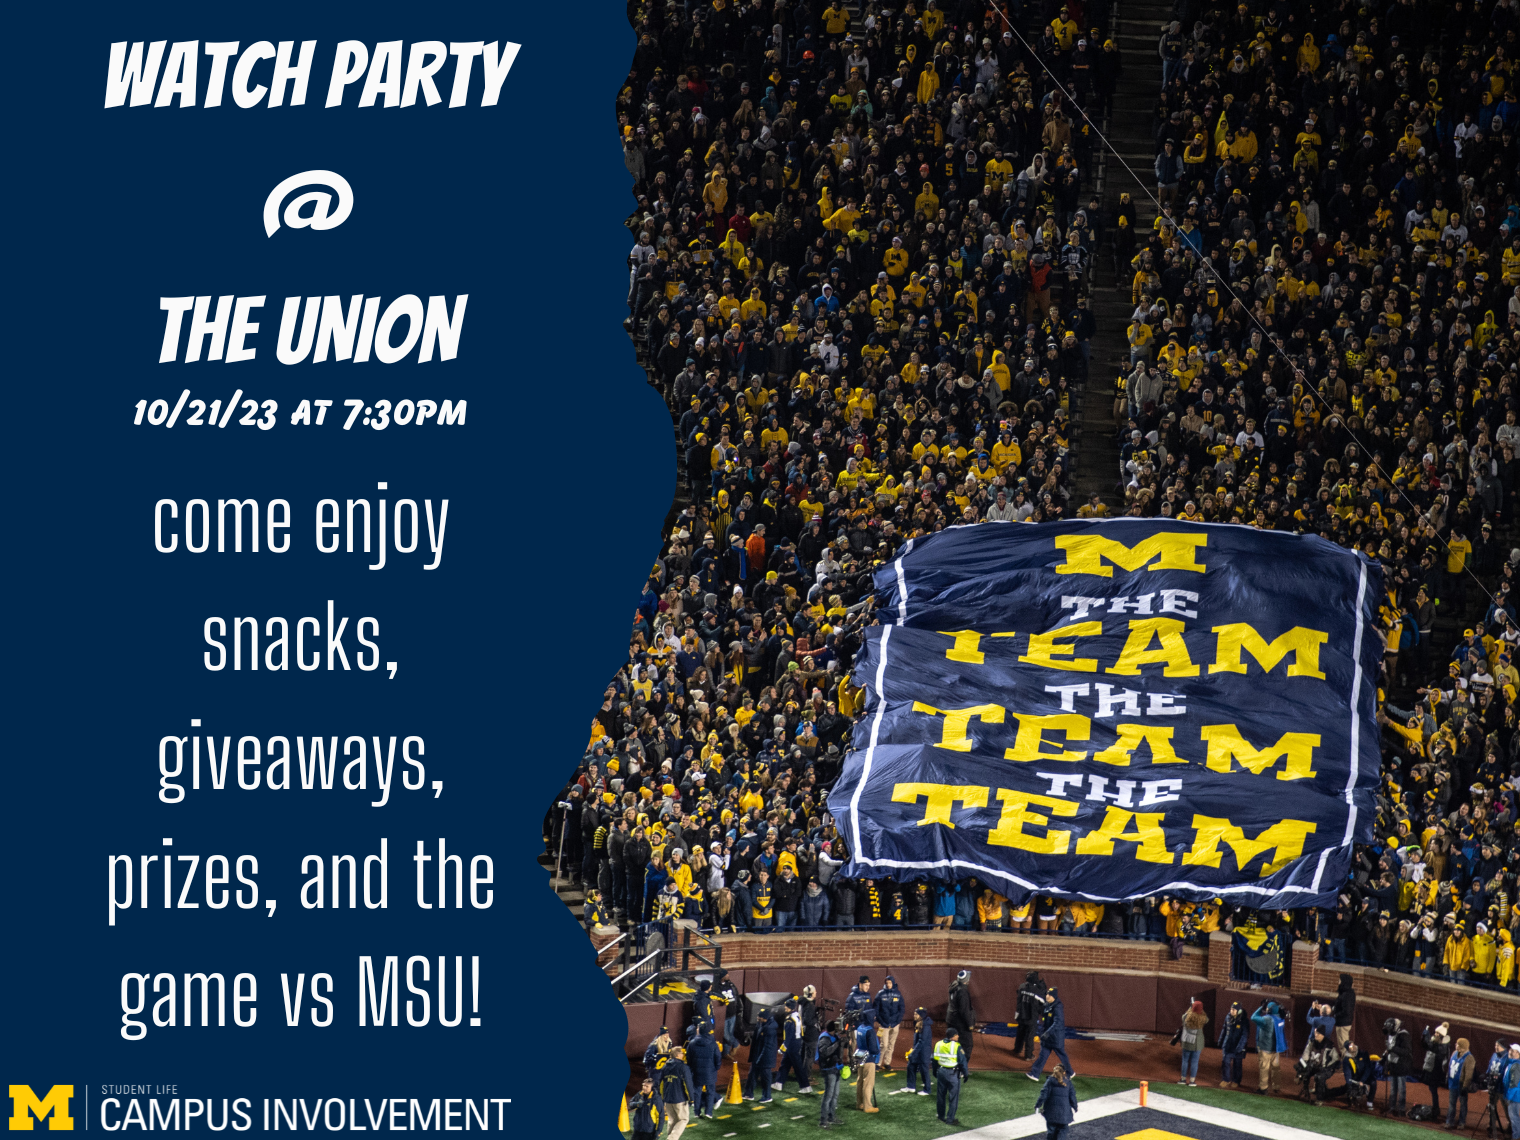 Expired) Watch Party @ The Union | Happening @ Michigan